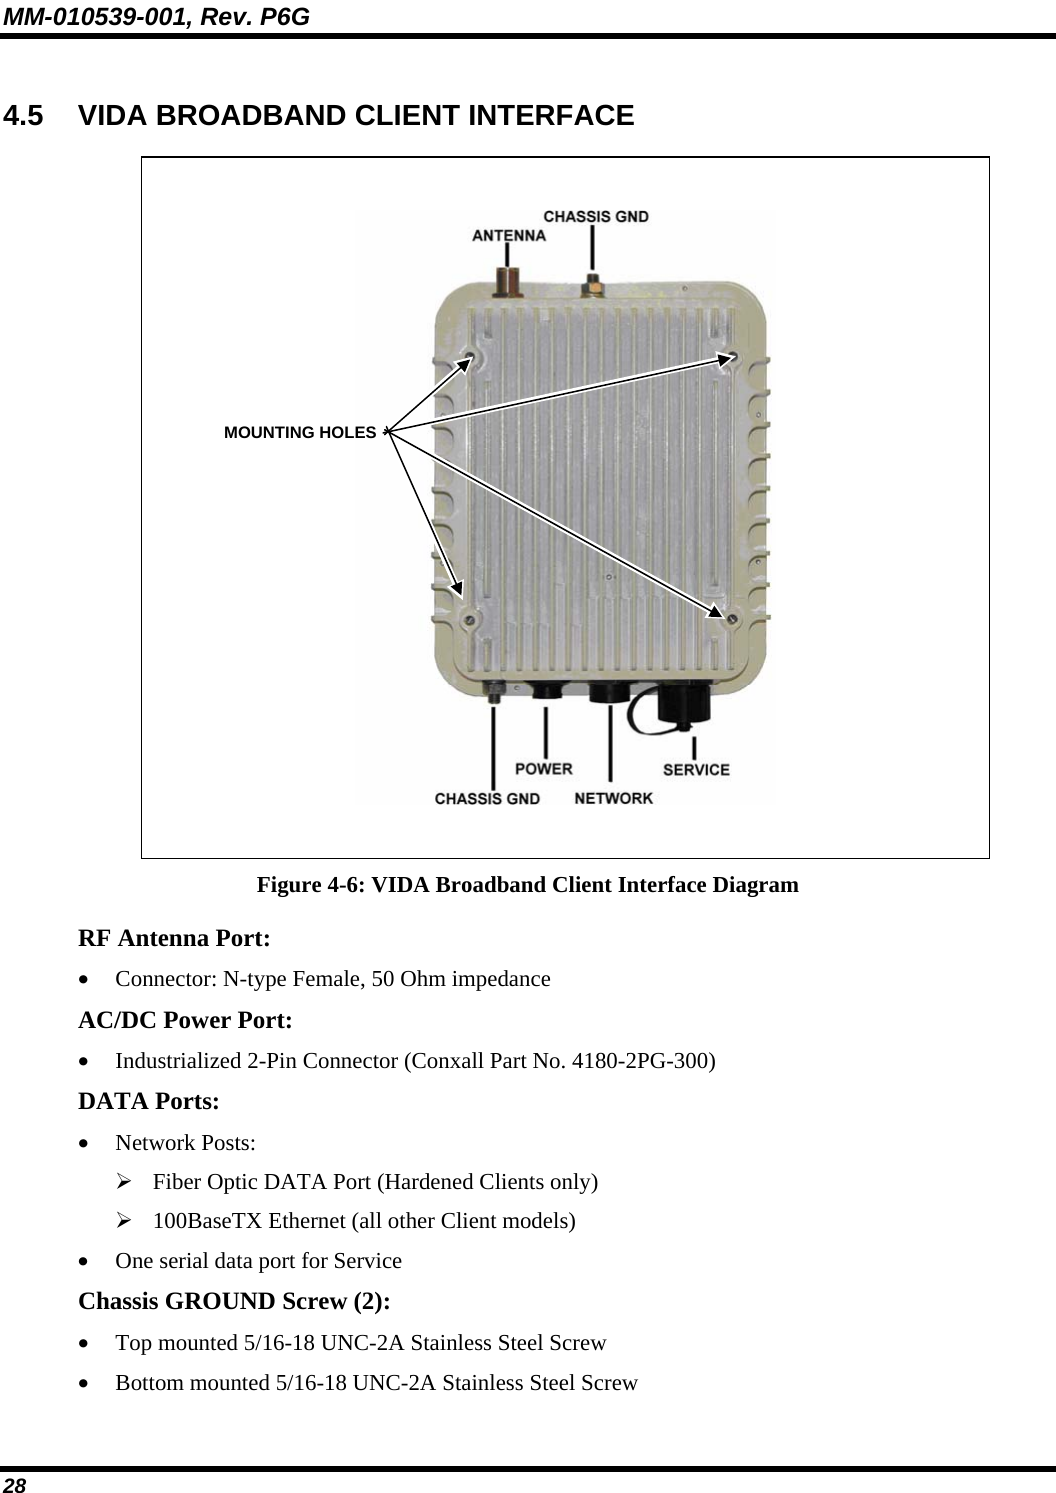 MM-010539-001, Rev. P6G 28 4.5 VIDA BROADBAND CLIENT INTERFACE    Figure 4-6: VIDA Broadband Client Interface Diagram RF Antenna Port: • Connector: N-type Female, 50 Ohm impedance AC/DC Power Port: • Industrialized 2-Pin Connector (Conxall Part No. 4180-2PG-300) DATA Ports: • Network Posts: ¾ Fiber Optic DATA Port (Hardened Clients only) ¾ 100BaseTX Ethernet (all other Client models) • One serial data port for Service Chassis GROUND Screw (2): • Top mounted 5/16-18 UNC-2A Stainless Steel Screw • Bottom mounted 5/16-18 UNC-2A Stainless Steel Screw MOUNTING HOLES 